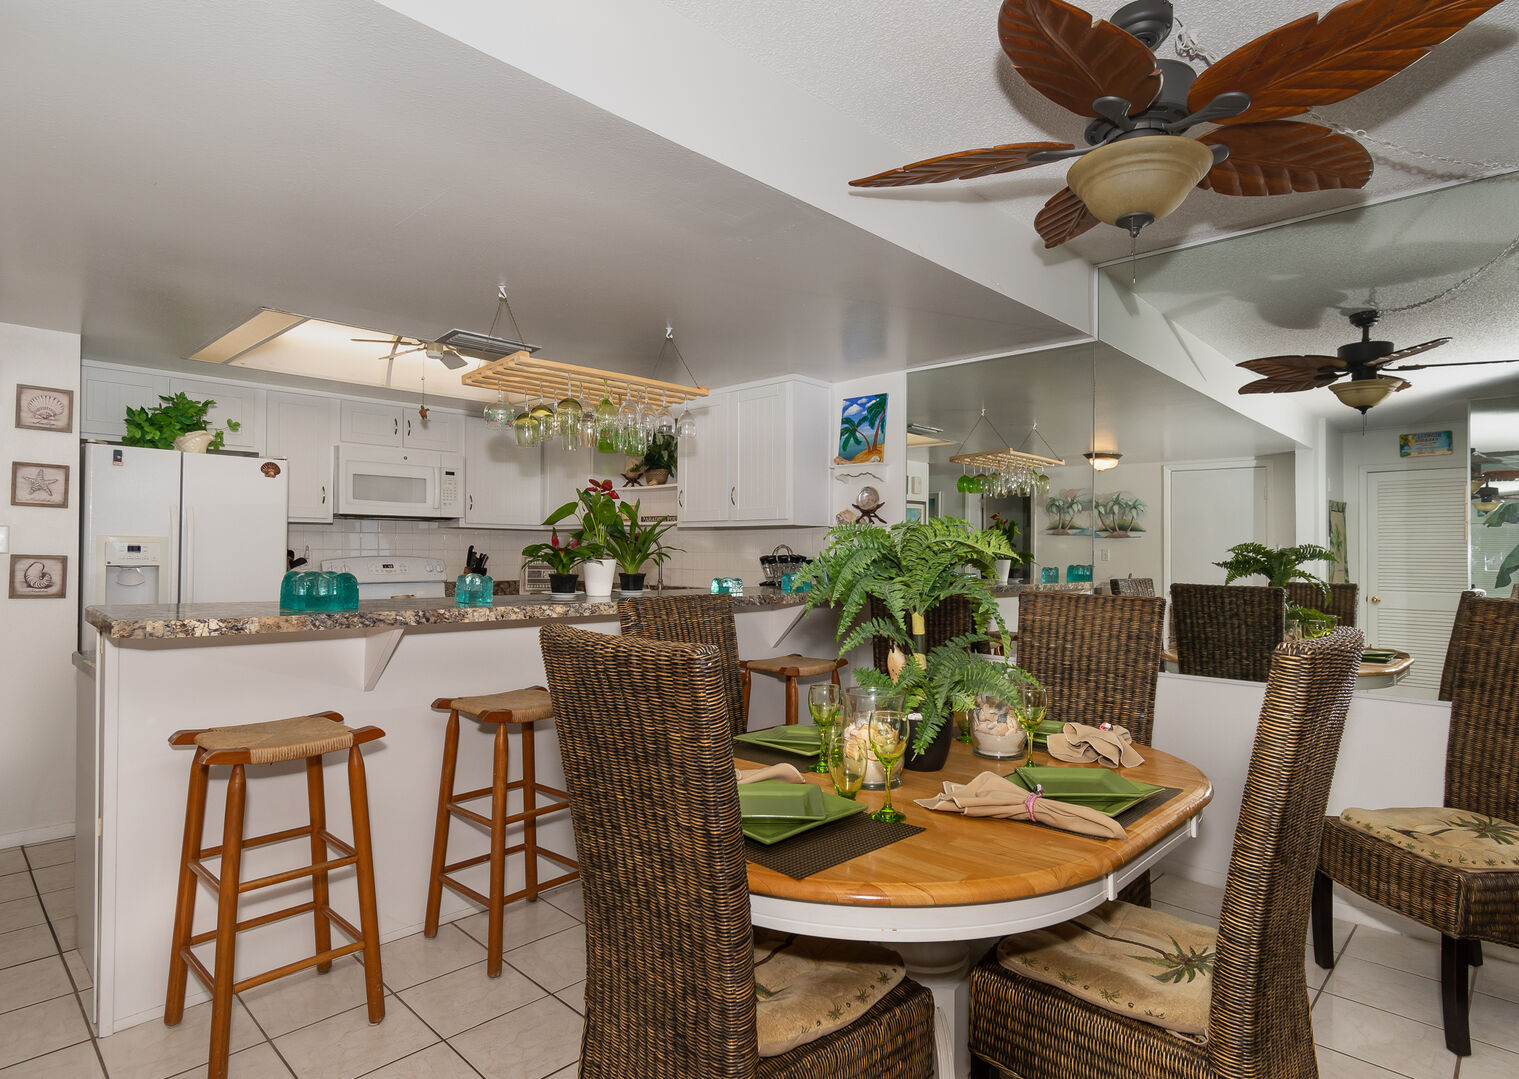 Ocean view dining room with seating for 6; with additional seating for 4 at the kitchen counter.